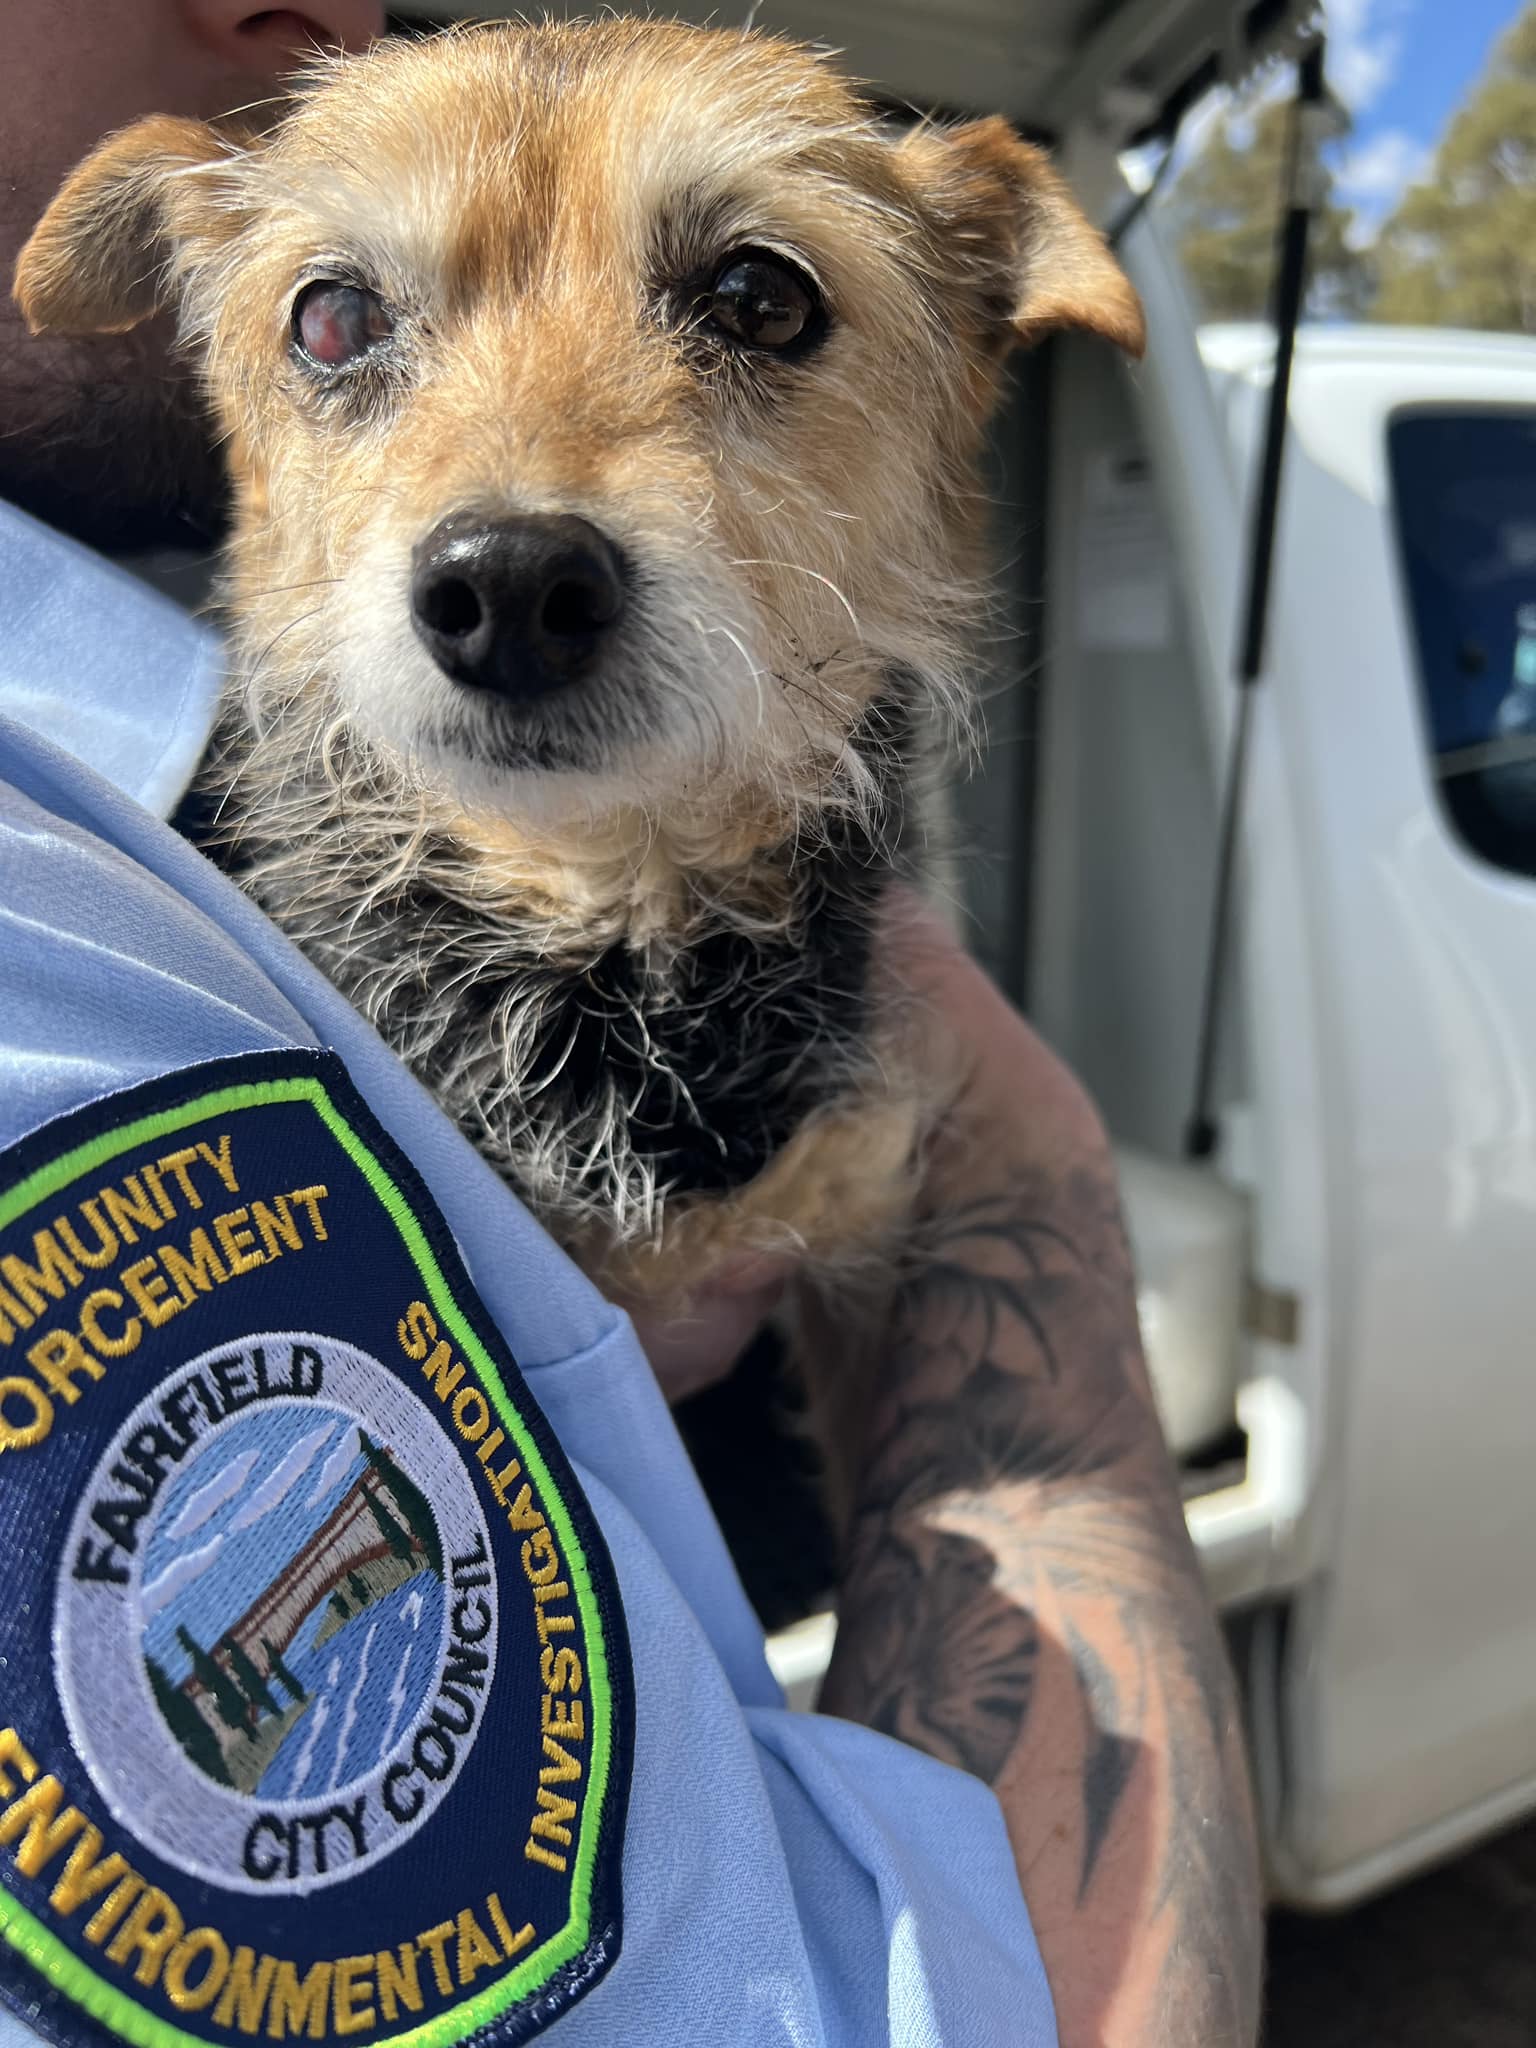 Small dog being held by Community Enforcement Officer